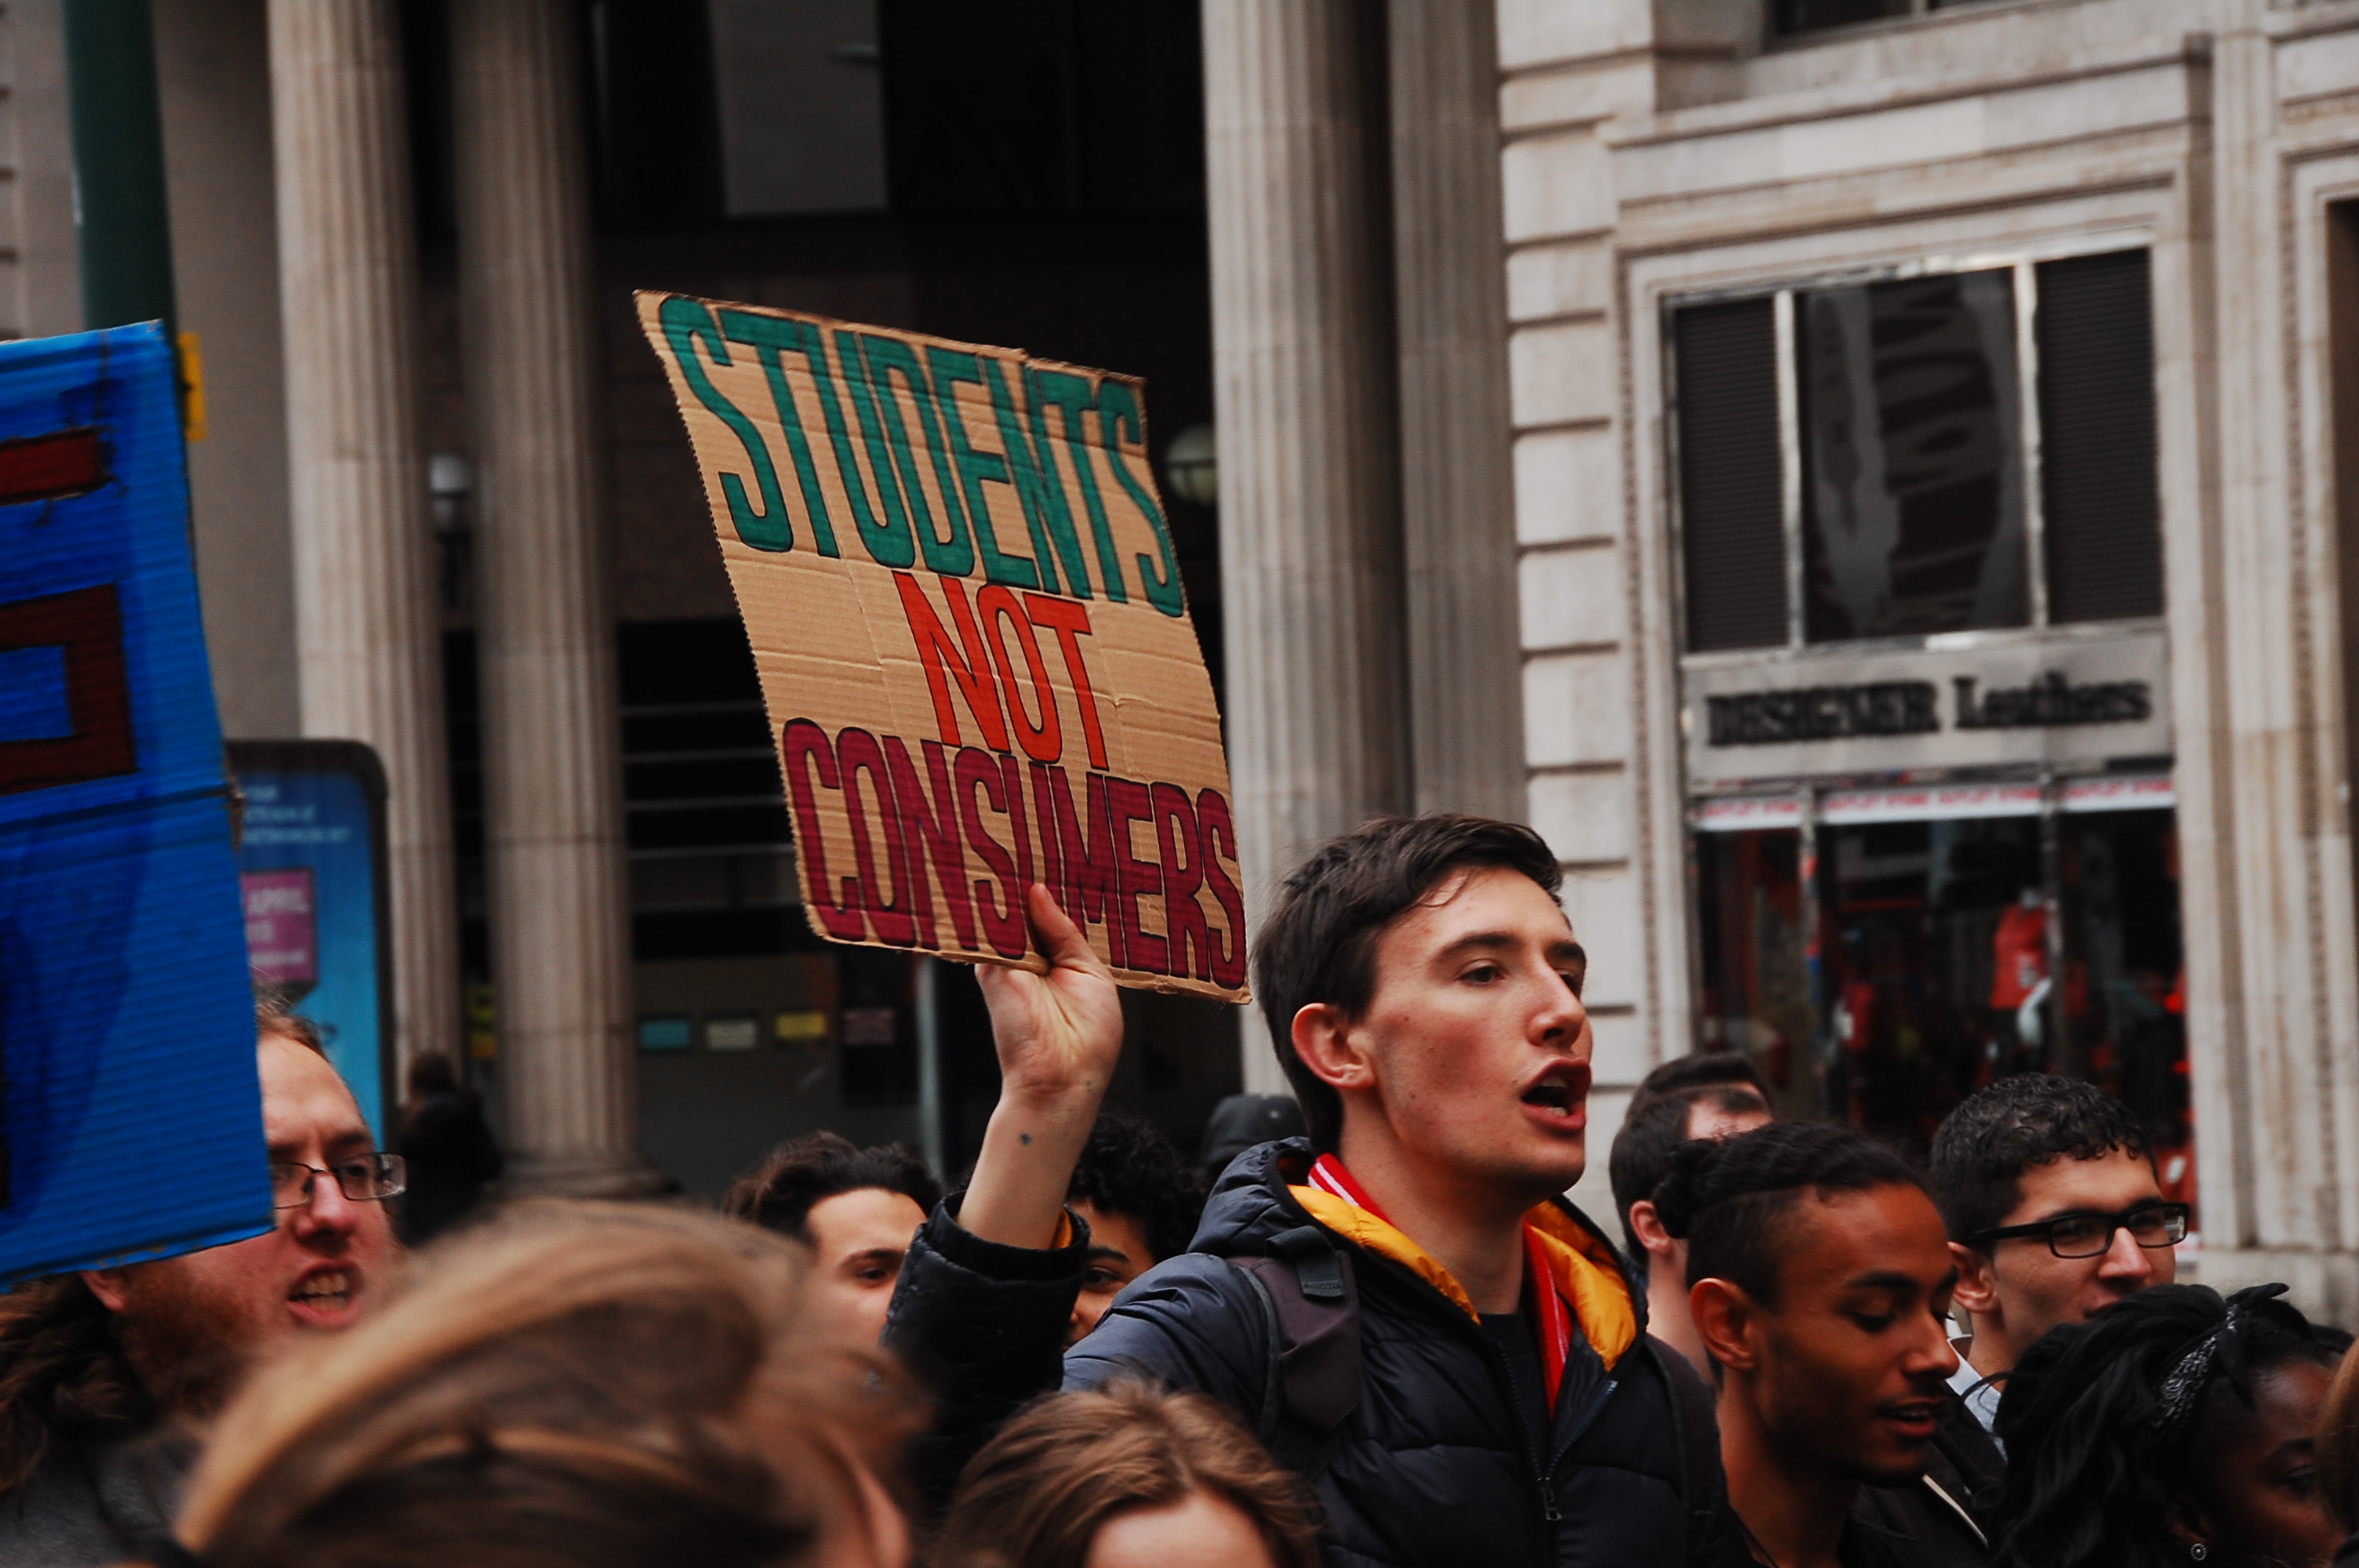 'Students not consumers!' Students at a Free Education Demonstration in Birmingham in March. Photo: William Pinkney-Baird